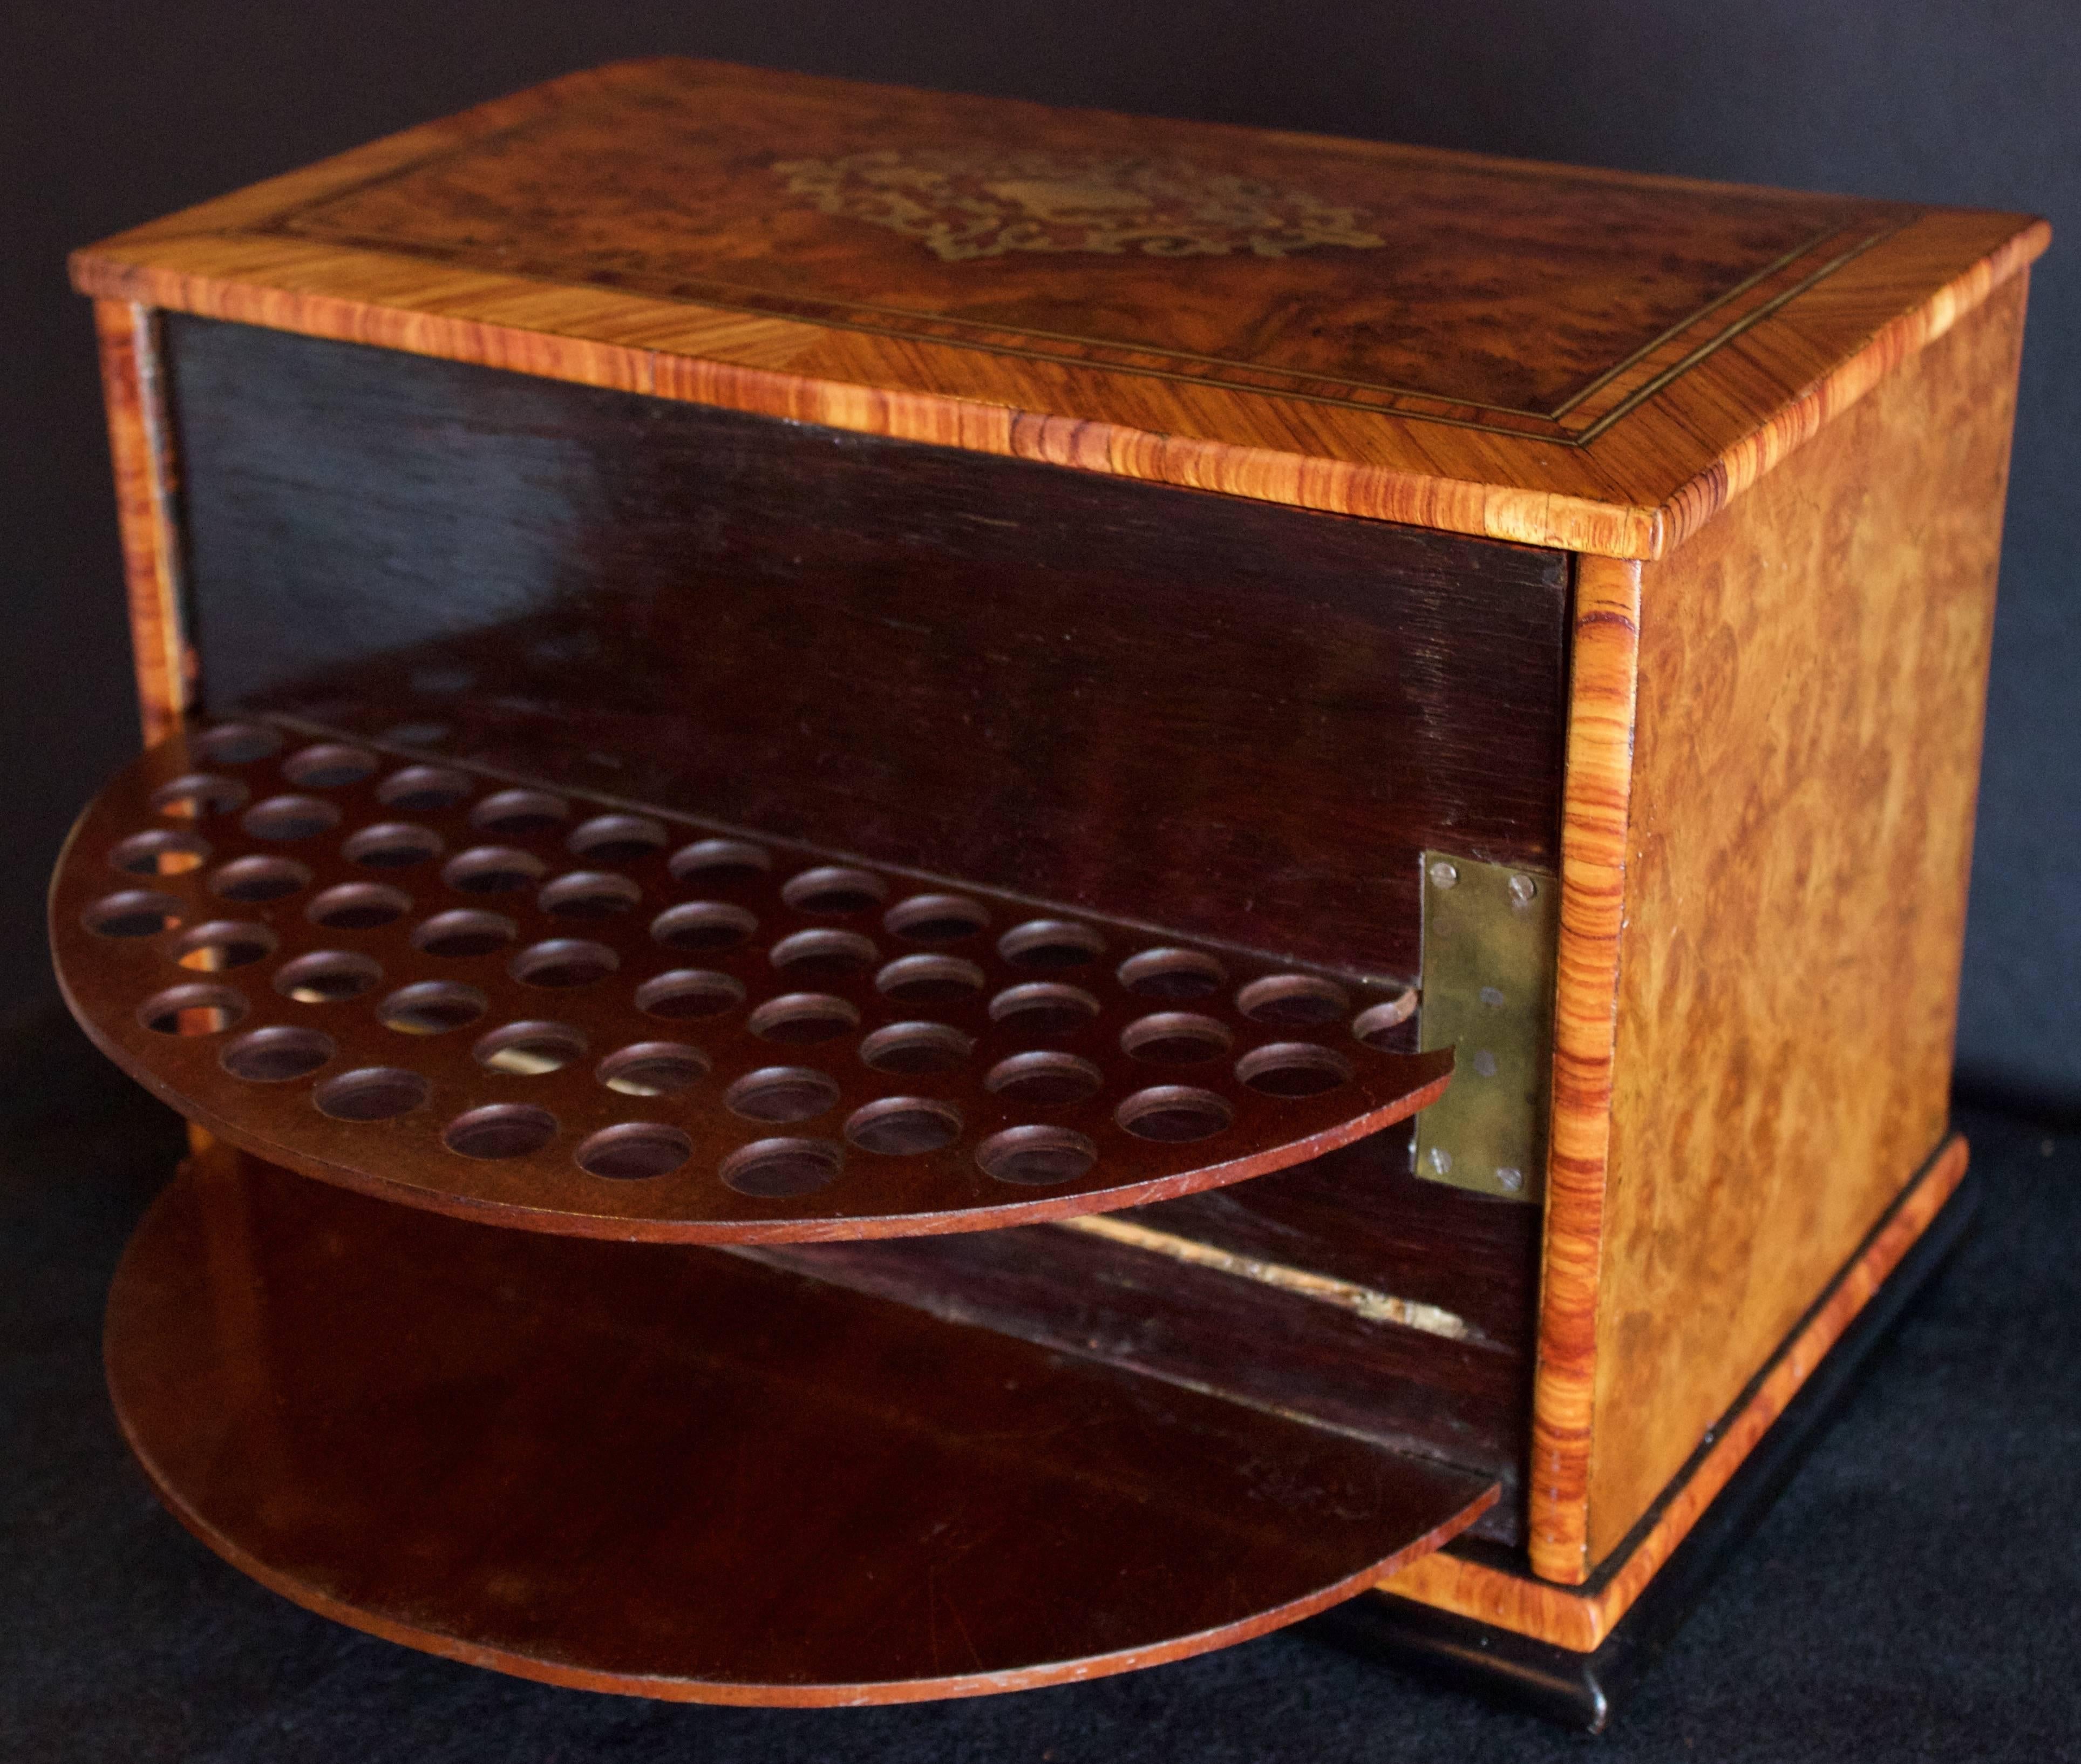 This handsome Napoleon III era (1850-1870) cigar box shows the very Fine craftsmanship of the small boxes during that Period.
Rectangular in its shape and resting on an ebonized wood base, the box has a gorgeous rosewood inlaid on three faces but